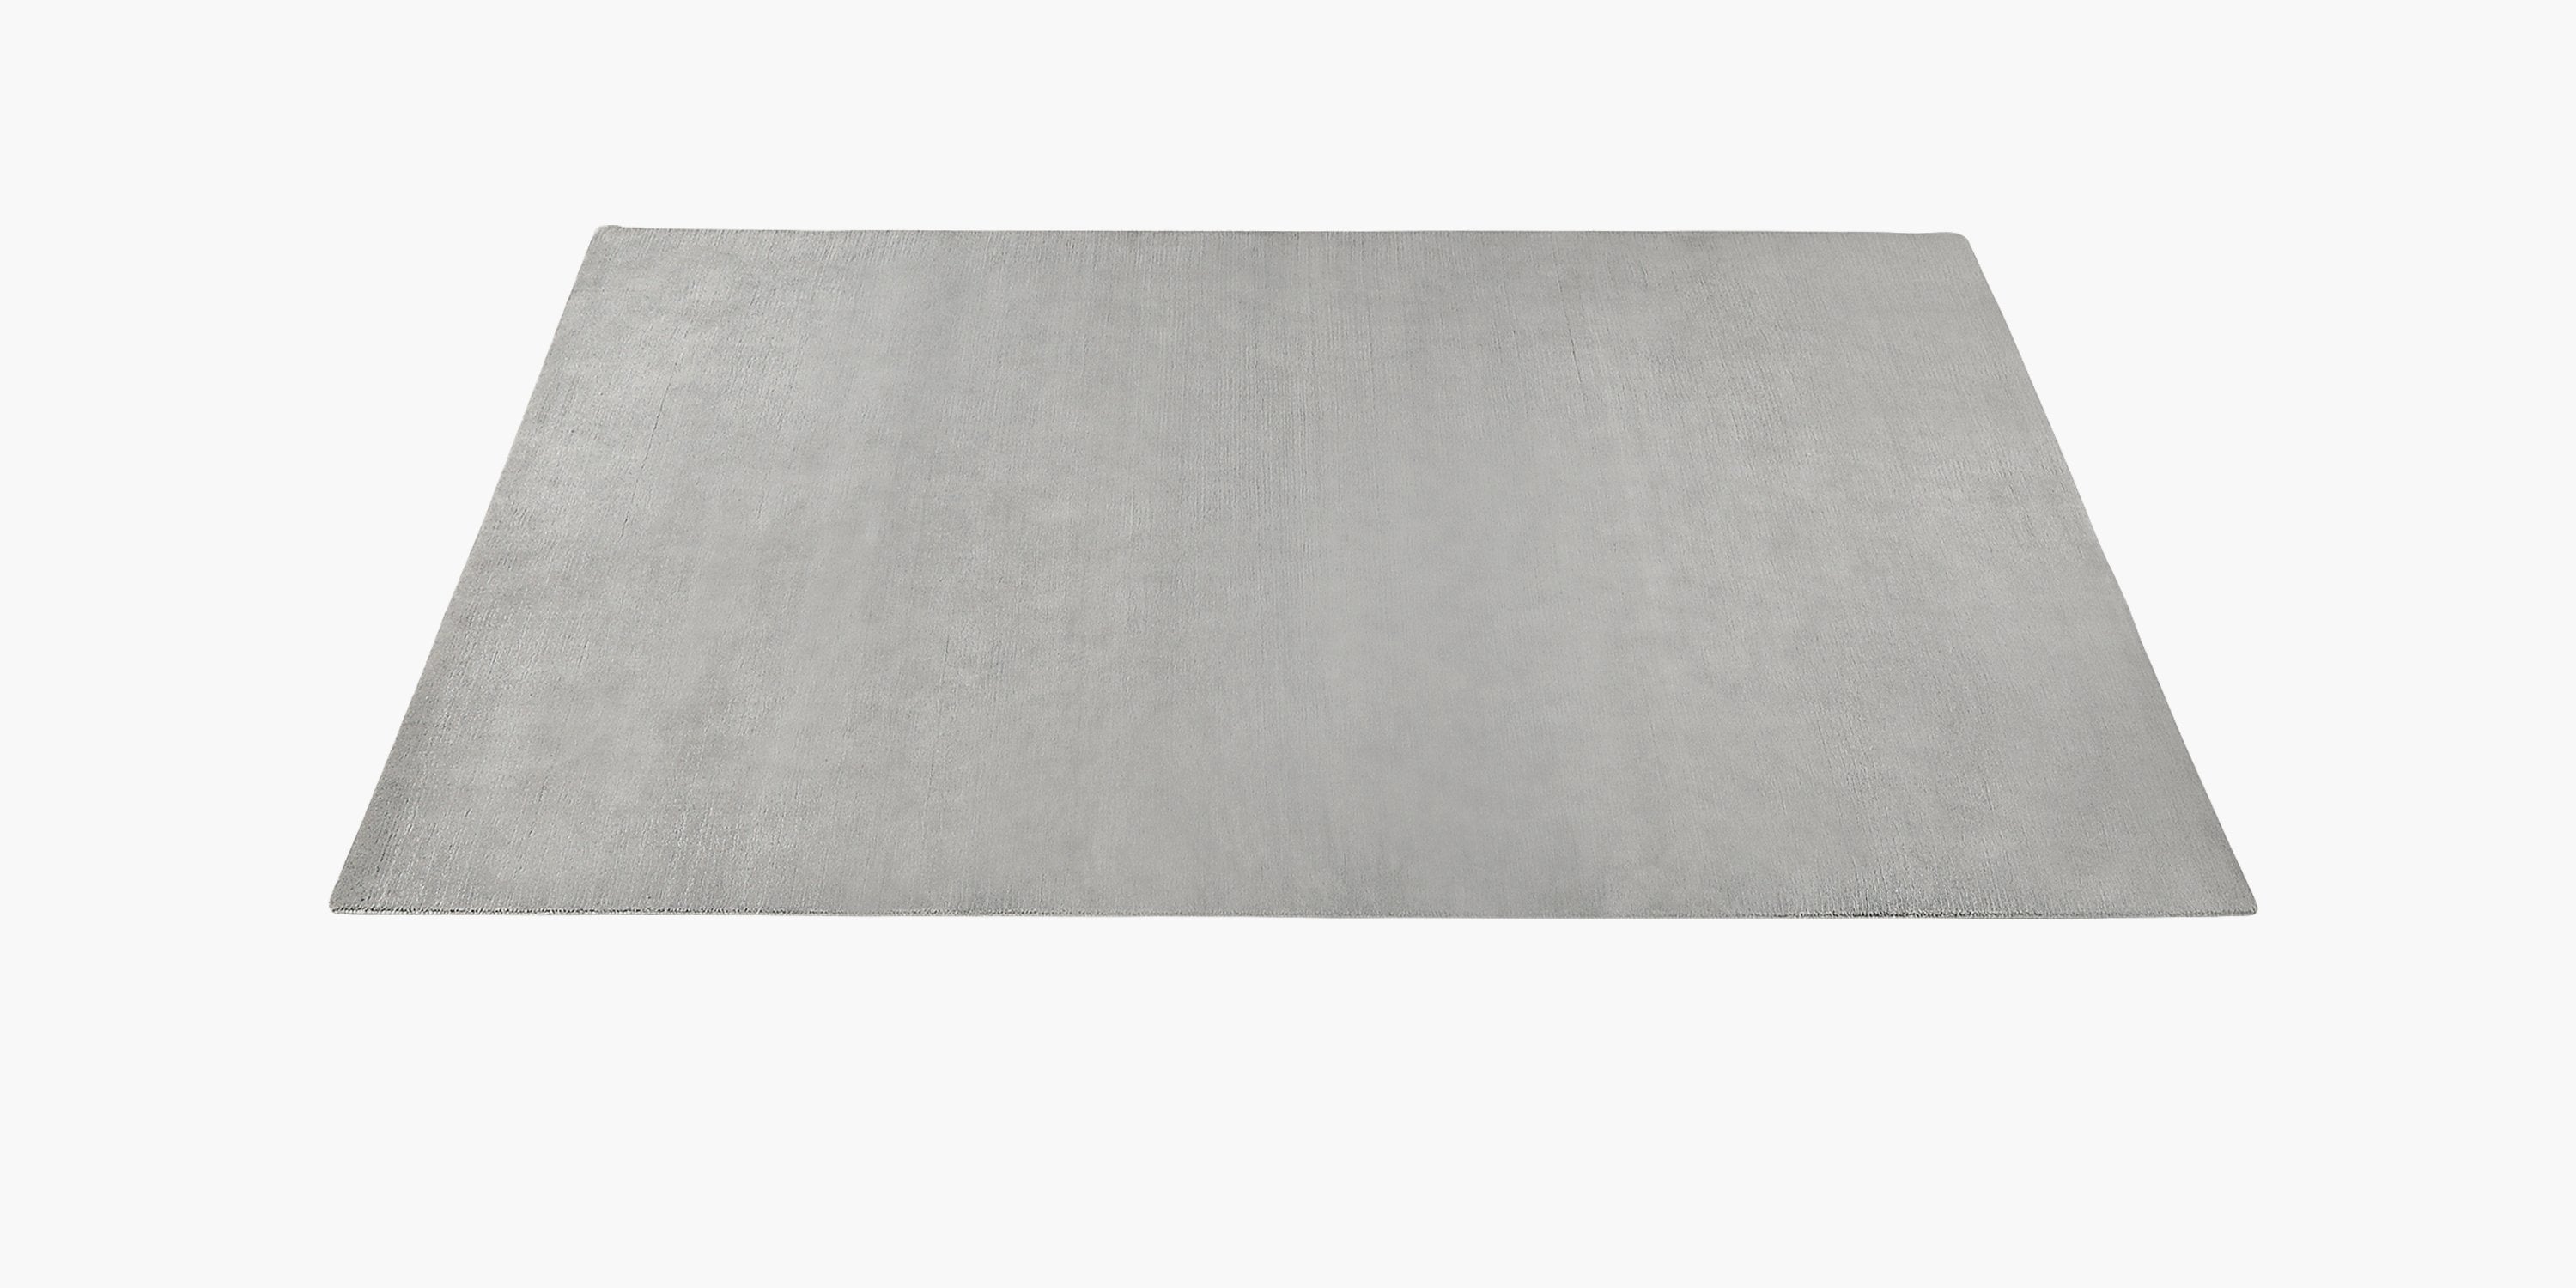 Performance Textra Rug – Grey (Grey / 8' x 10' - PRICE AS MARKED - FINAL SALE)